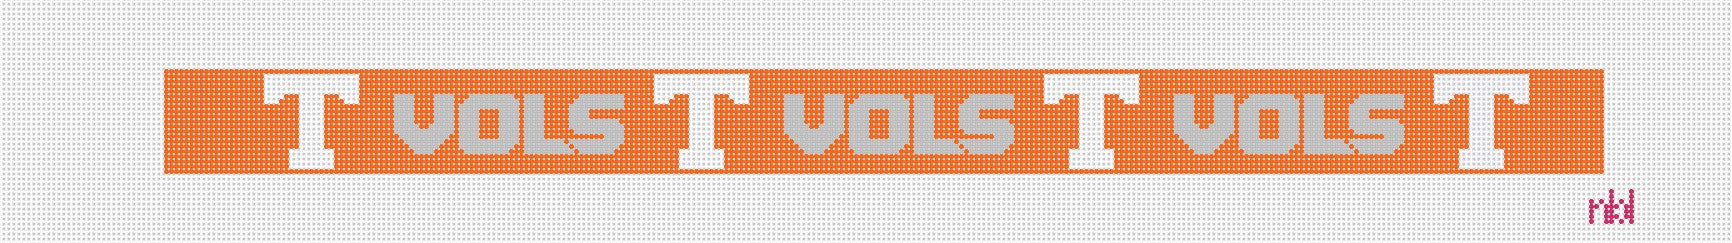 Tennessee Vols and Power T Belt Canvas - Needlepoint by Laura